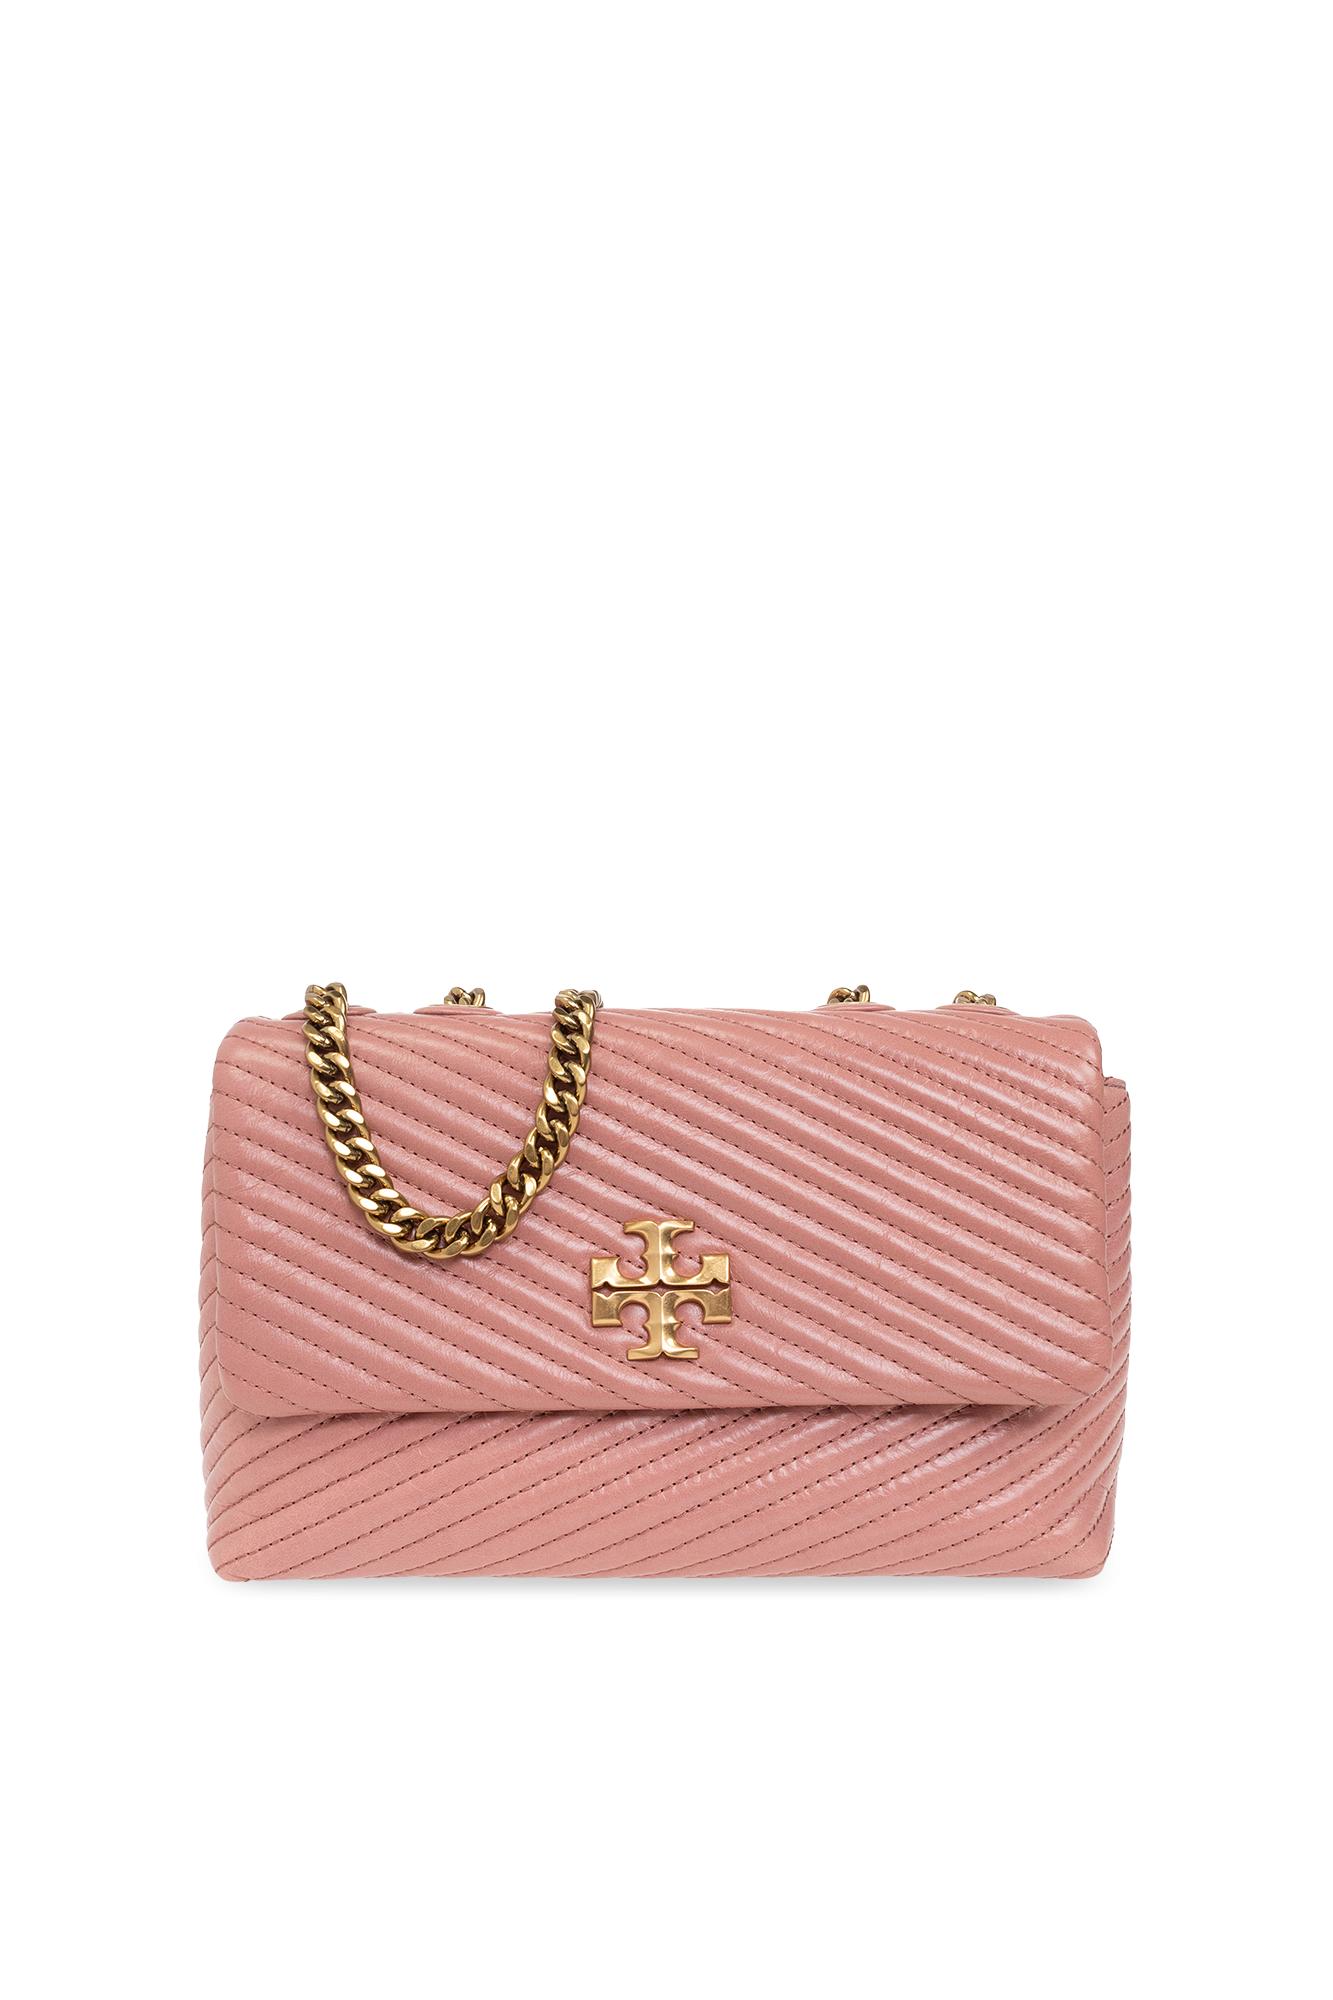 Tory Burch Purse Pink Gold Chain Quilted Leather Flap Shoulder Bag